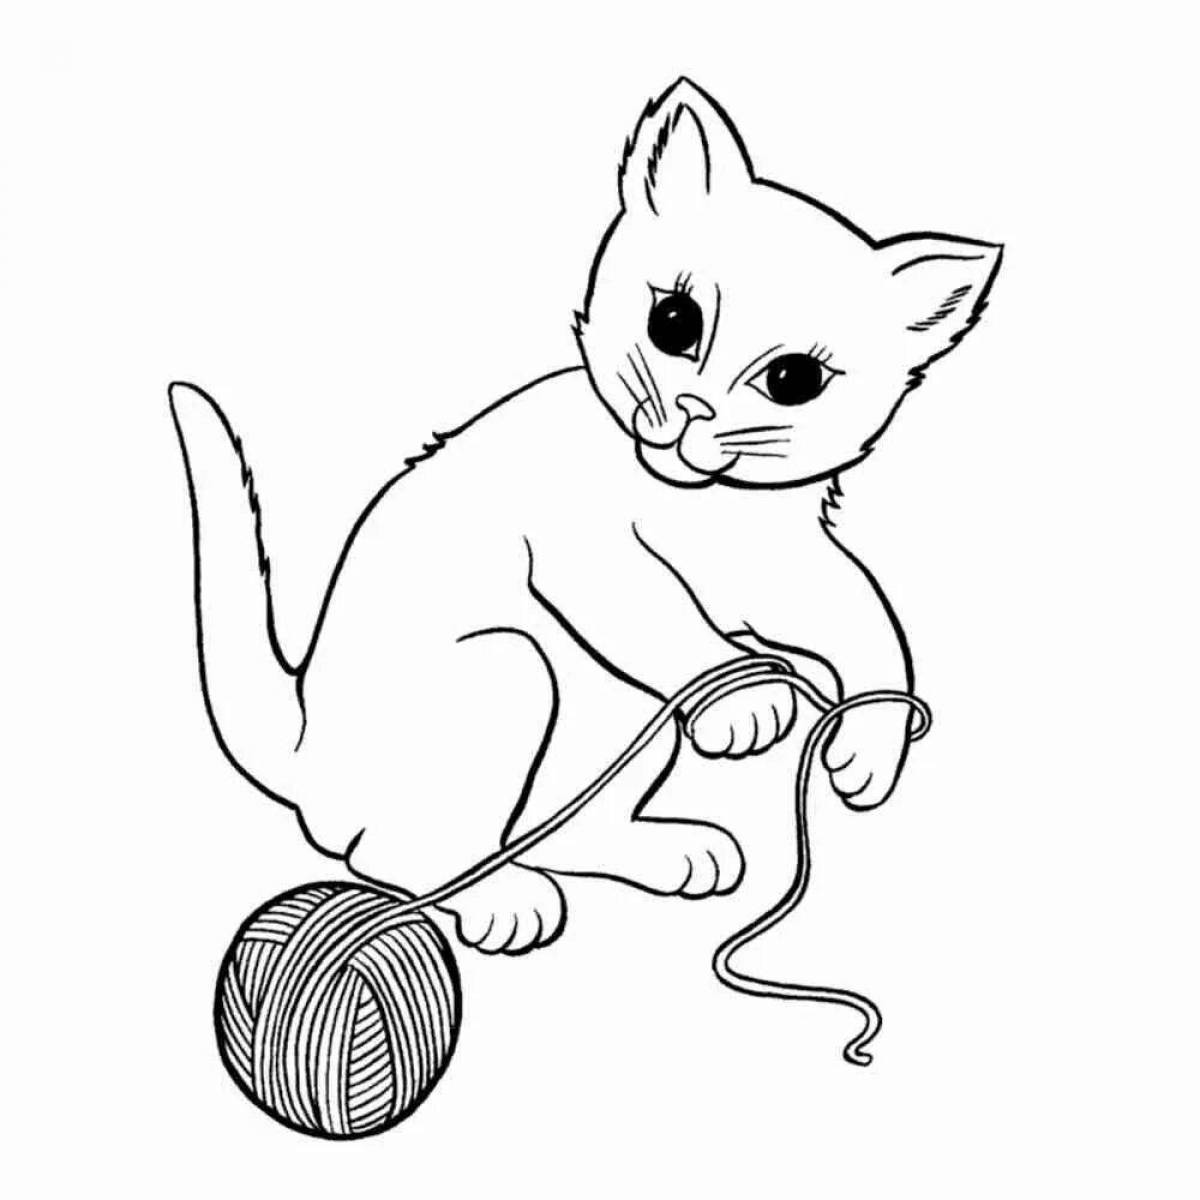 Curious cats coloring pages